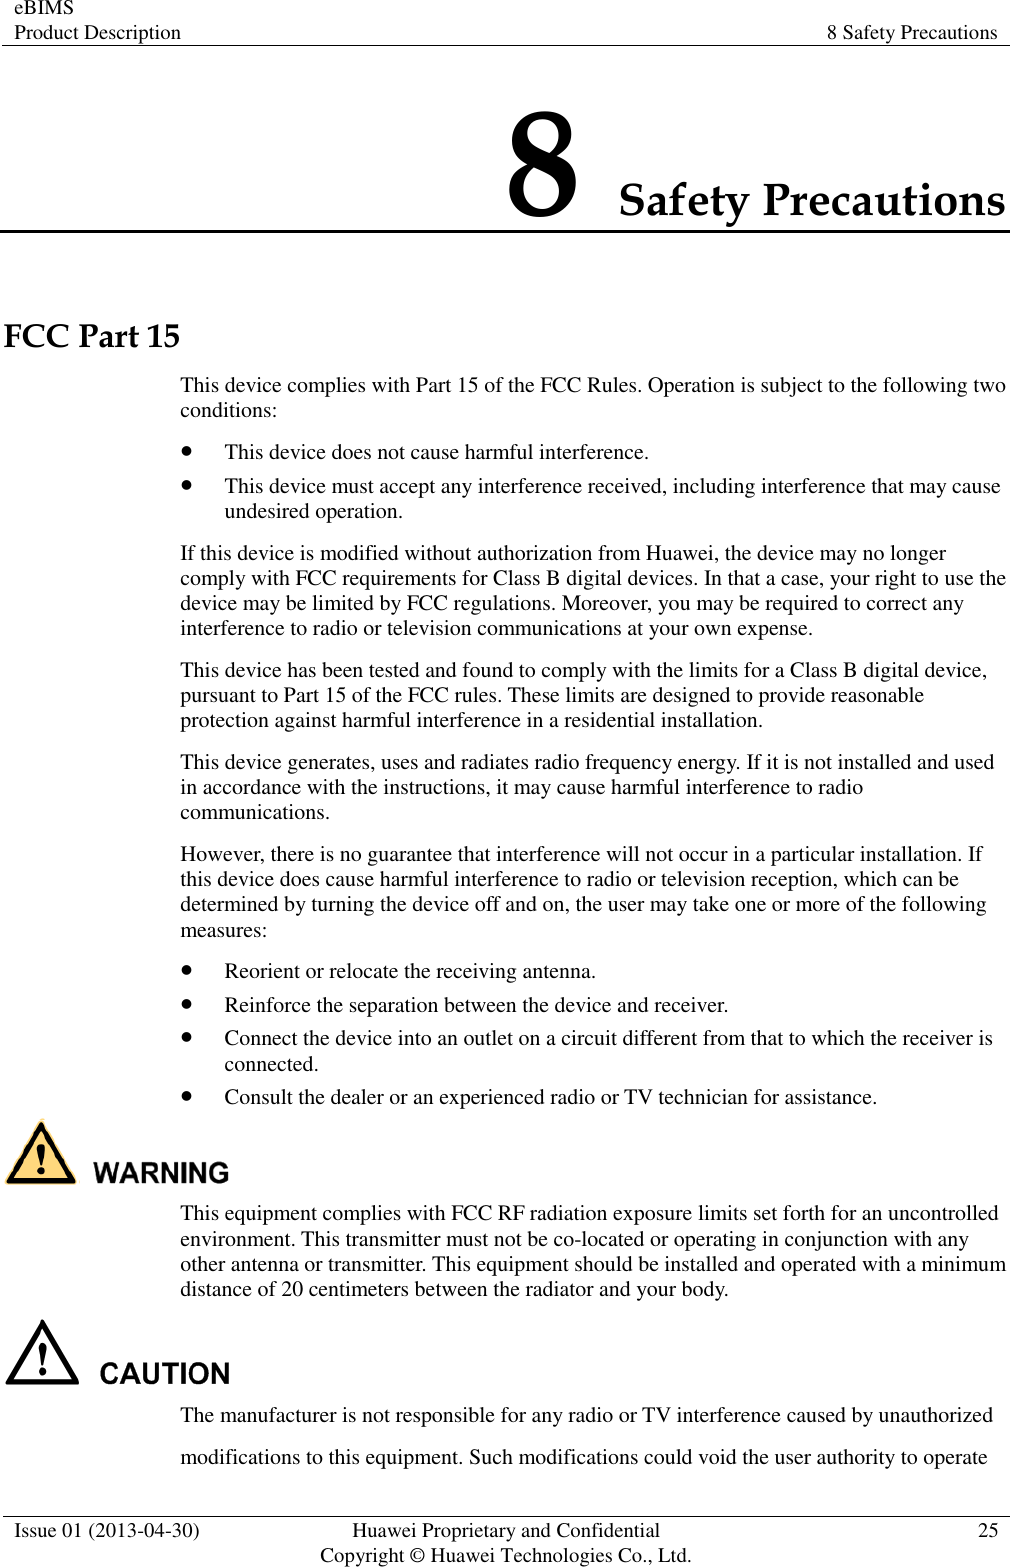 eBIMS Product Description 8 Safety Precautions  Issue 01 (2013-04-30) Huawei Proprietary and Confidential                                     Copyright © Huawei Technologies Co., Ltd. 25  8 Safety Precautions FCC Part 15 This device complies with Part 15 of the FCC Rules. Operation is subject to the following two conditions:  This device does not cause harmful interference.  This device must accept any interference received, including interference that may cause undesired operation. If this device is modified without authorization from Huawei, the device may no longer comply with FCC requirements for Class B digital devices. In that a case, your right to use the device may be limited by FCC regulations. Moreover, you may be required to correct any interference to radio or television communications at your own expense. This device has been tested and found to comply with the limits for a Class B digital device, pursuant to Part 15 of the FCC rules. These limits are designed to provide reasonable protection against harmful interference in a residential installation. This device generates, uses and radiates radio frequency energy. If it is not installed and used in accordance with the instructions, it may cause harmful interference to radio communications. However, there is no guarantee that interference will not occur in a particular installation. If this device does cause harmful interference to radio or television reception, which can be determined by turning the device off and on, the user may take one or more of the following measures:  Reorient or relocate the receiving antenna.  Reinforce the separation between the device and receiver.  Connect the device into an outlet on a circuit different from that to which the receiver is connected.  Consult the dealer or an experienced radio or TV technician for assistance.  This equipment complies with FCC RF radiation exposure limits set forth for an uncontrolled environment. This transmitter must not be co-located or operating in conjunction with any other antenna or transmitter. This equipment should be installed and operated with a minimum distance of 20 centimeters between the radiator and your body.    The manufacturer is not responsible for any radio or TV interference caused by unauthorized modifications to this equipment. Such modifications could void the user authority to operate 